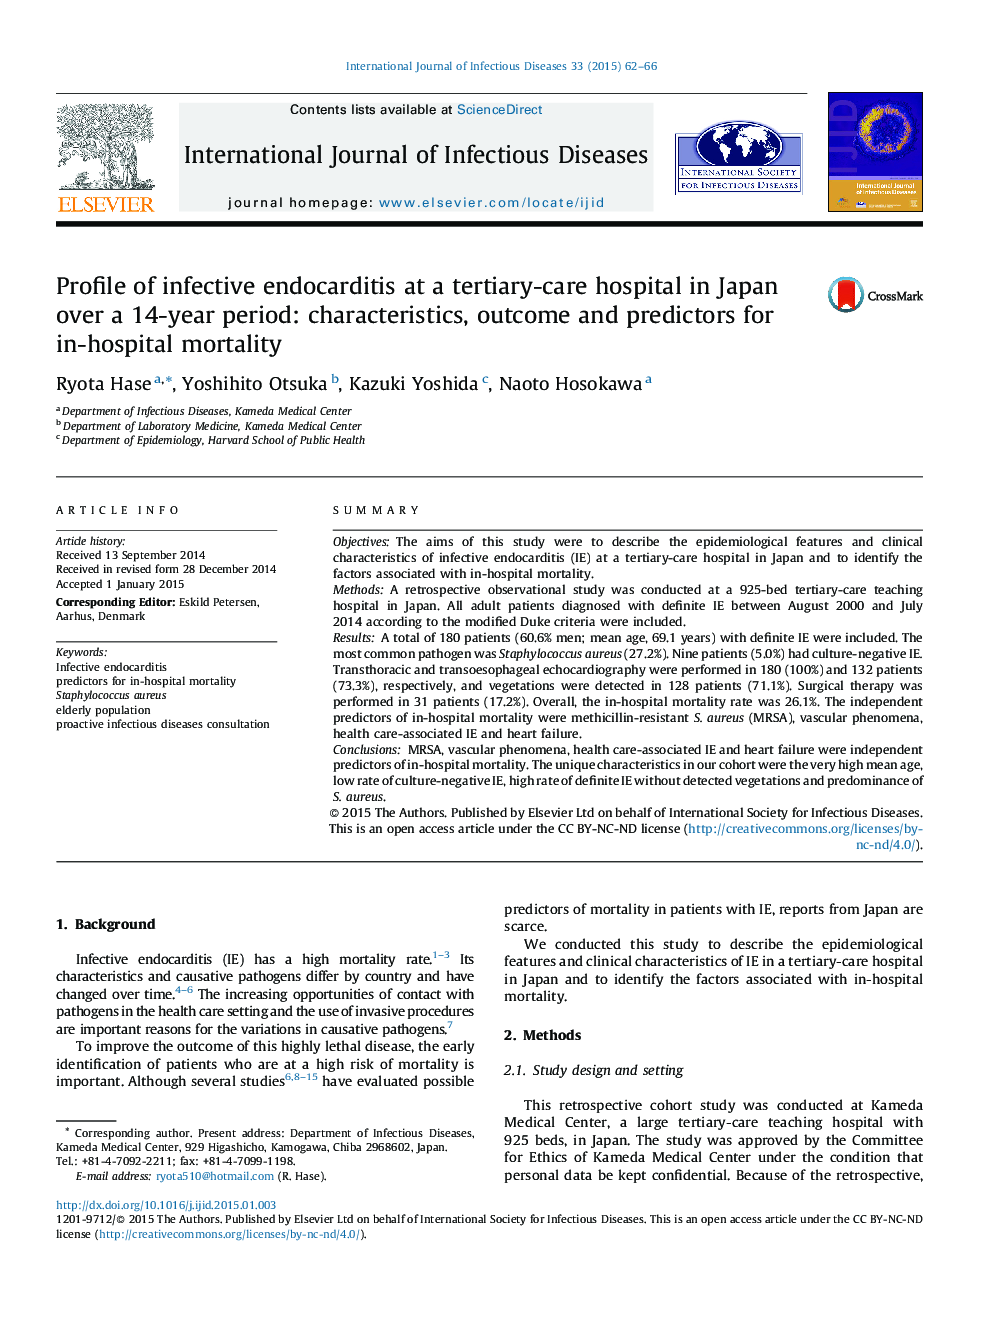 Profile of infective endocarditis at a tertiary-care hospital in Japan over a 14-year period: characteristics, outcome and predictors for in-hospital mortality